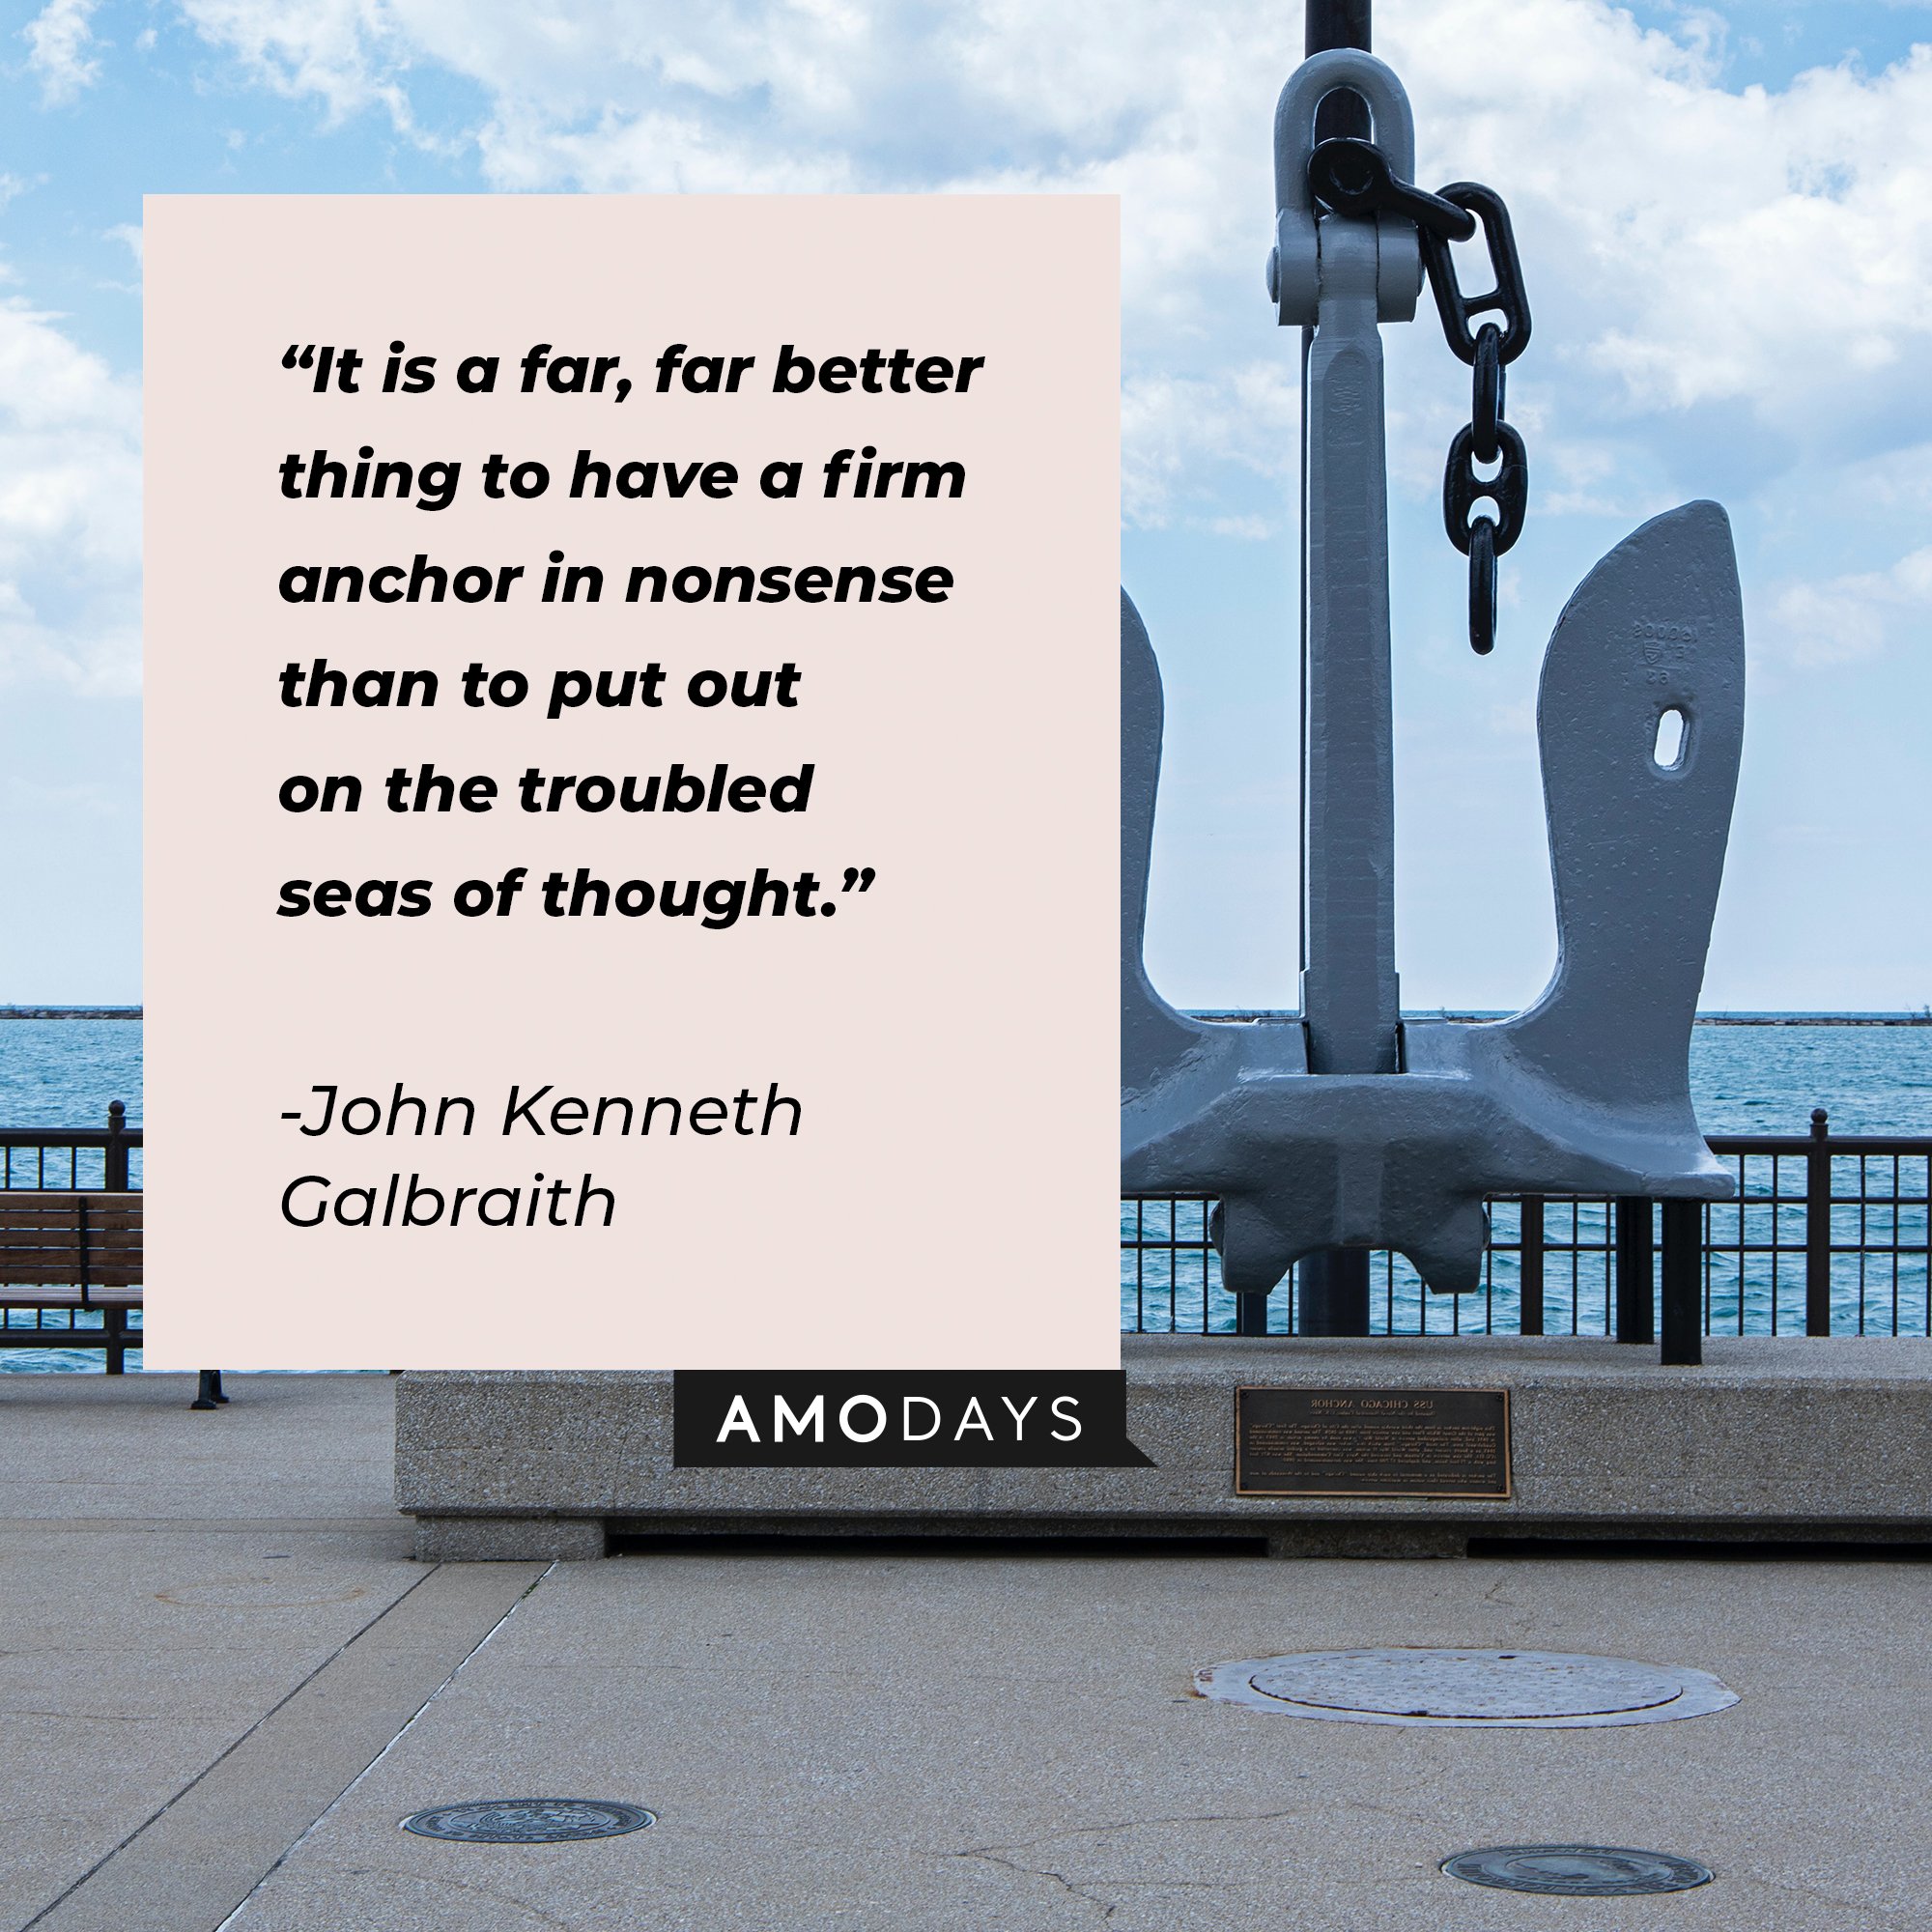 John Kenneth Galbraith's quote: "It is a far, far better thing to have a firm anchor in nonsense than to put out on the troubled seas of thought." | Image: AmoDays